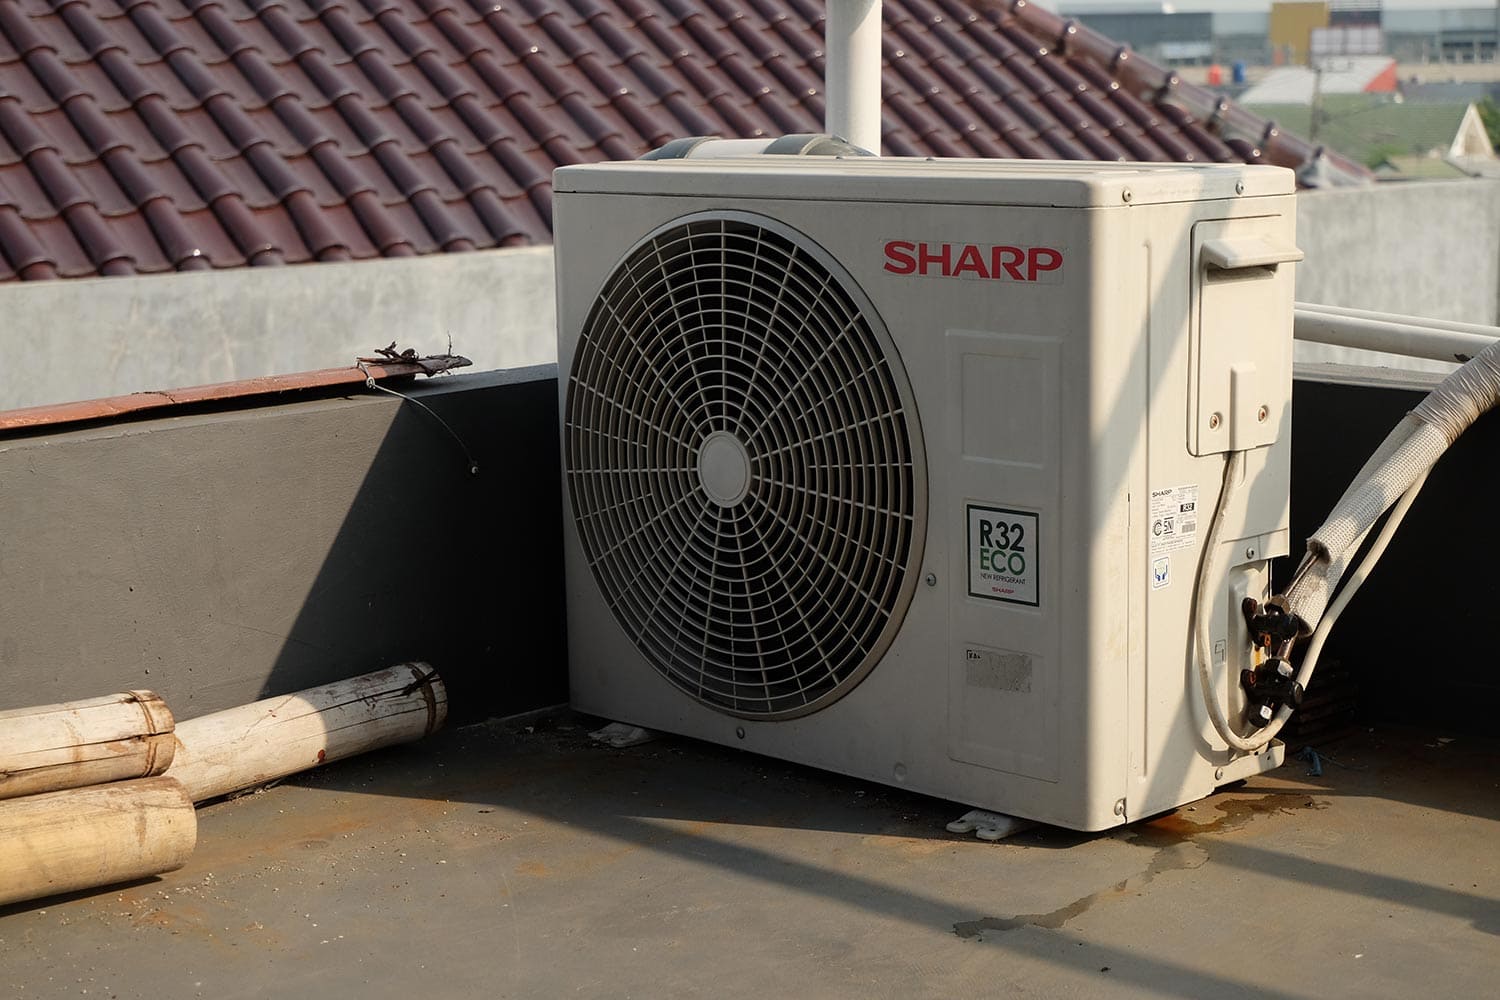 Sharp air conditioner box outside that is placed on top of the house